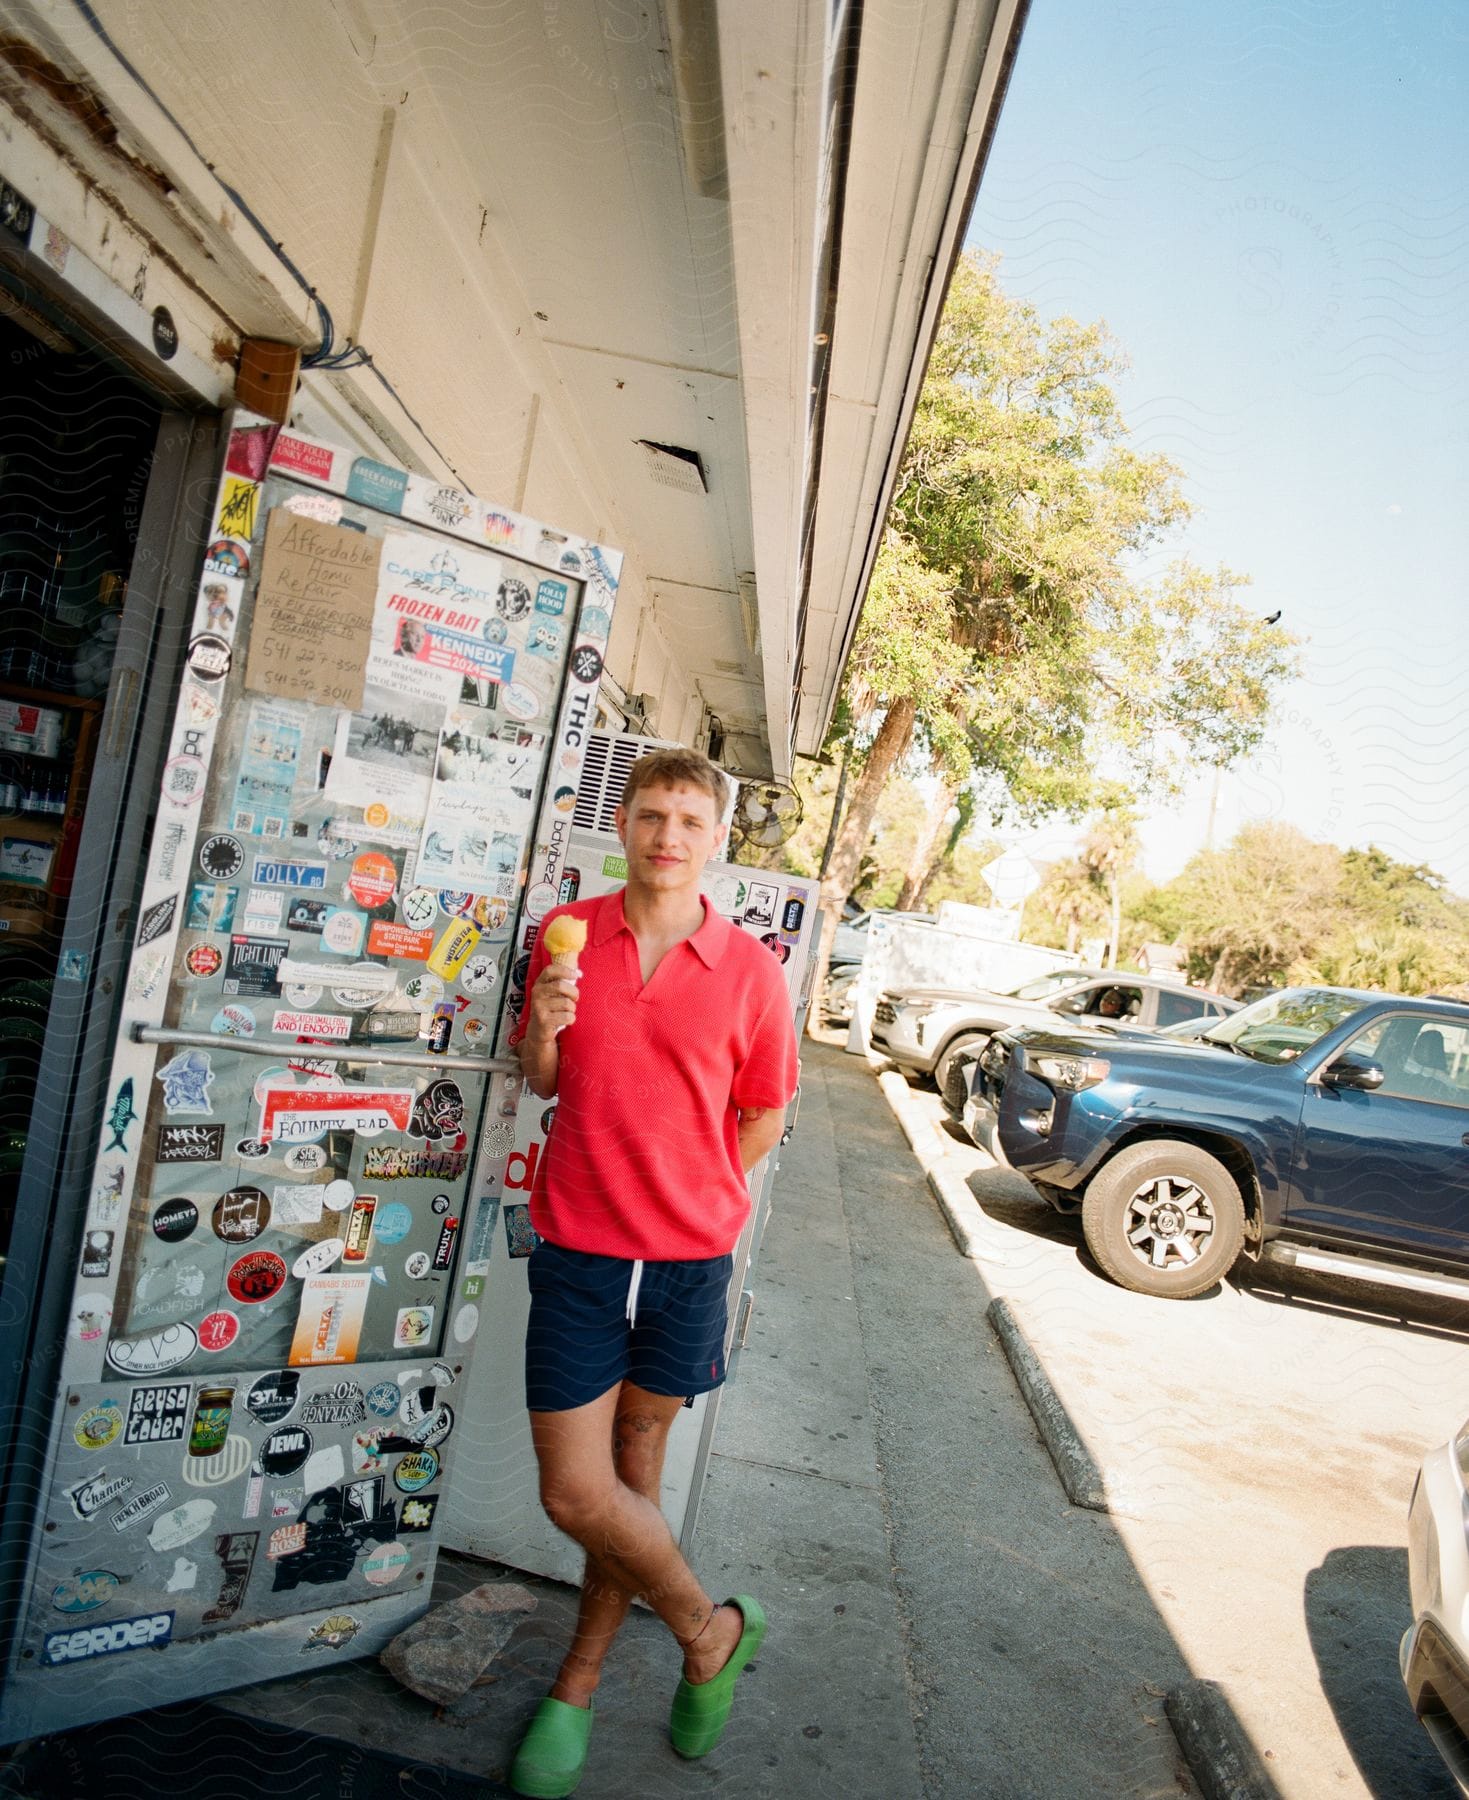 A man, clad in a red polo shirt, dark blue shorts, and green shoes, leans against a store's door while enjoying a cone of ice cream